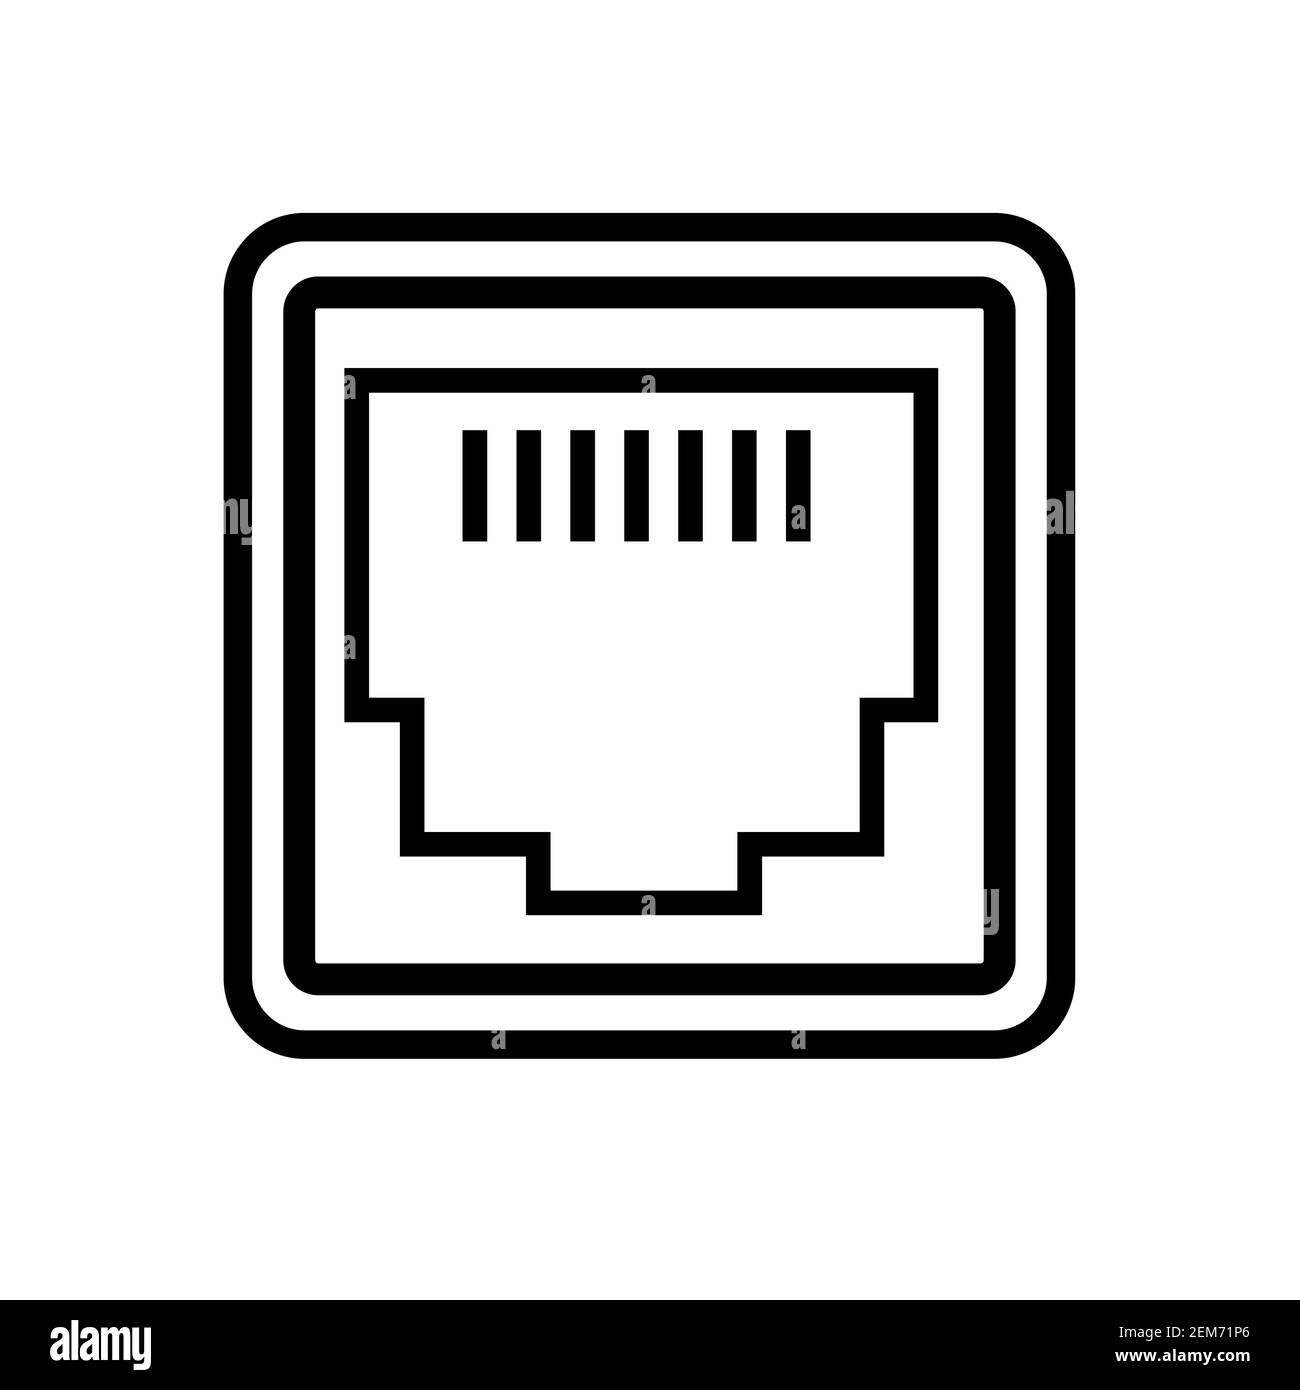 lan network port icon on white background. flat style. local area connector  icon for your web site design, logo, app, UI. network port symbol. network  Stock Photo - Alamy